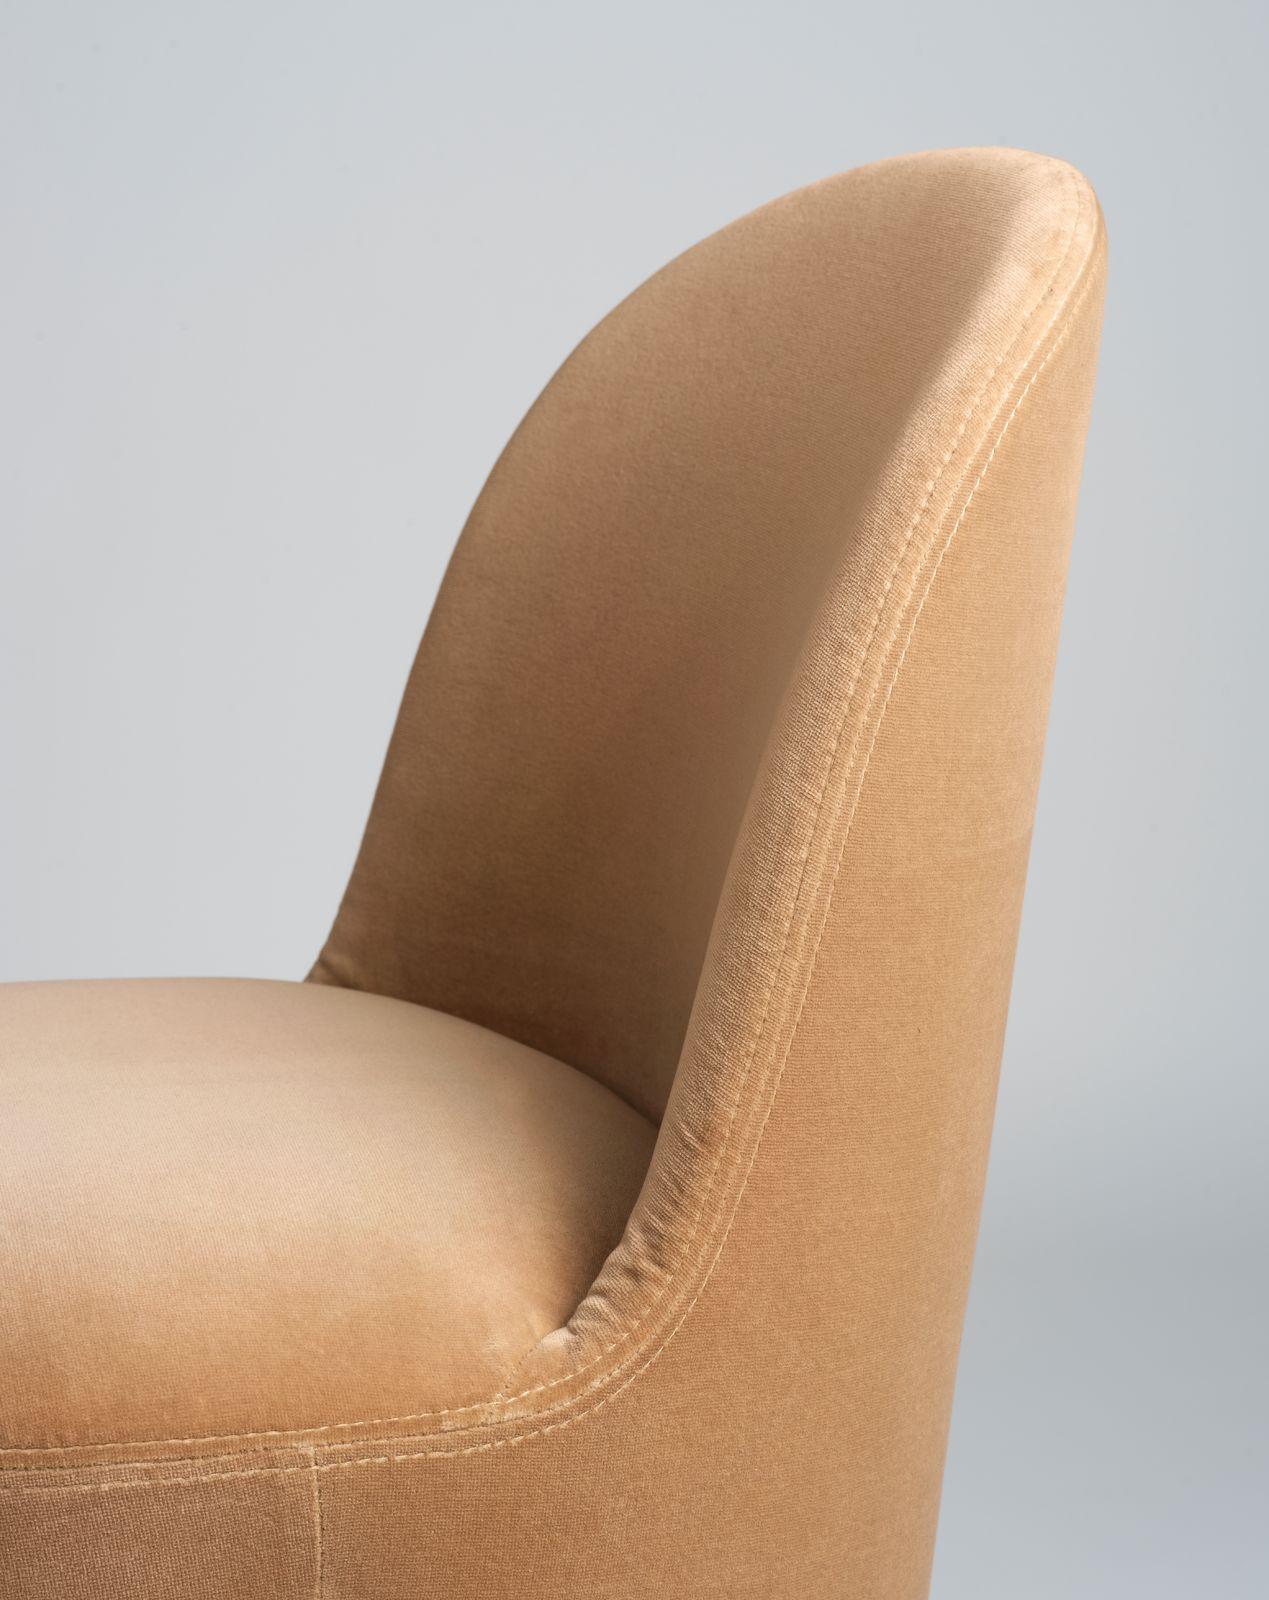 Brushed Tail High Back Chauffeuse Style Upholstered Dining Chair